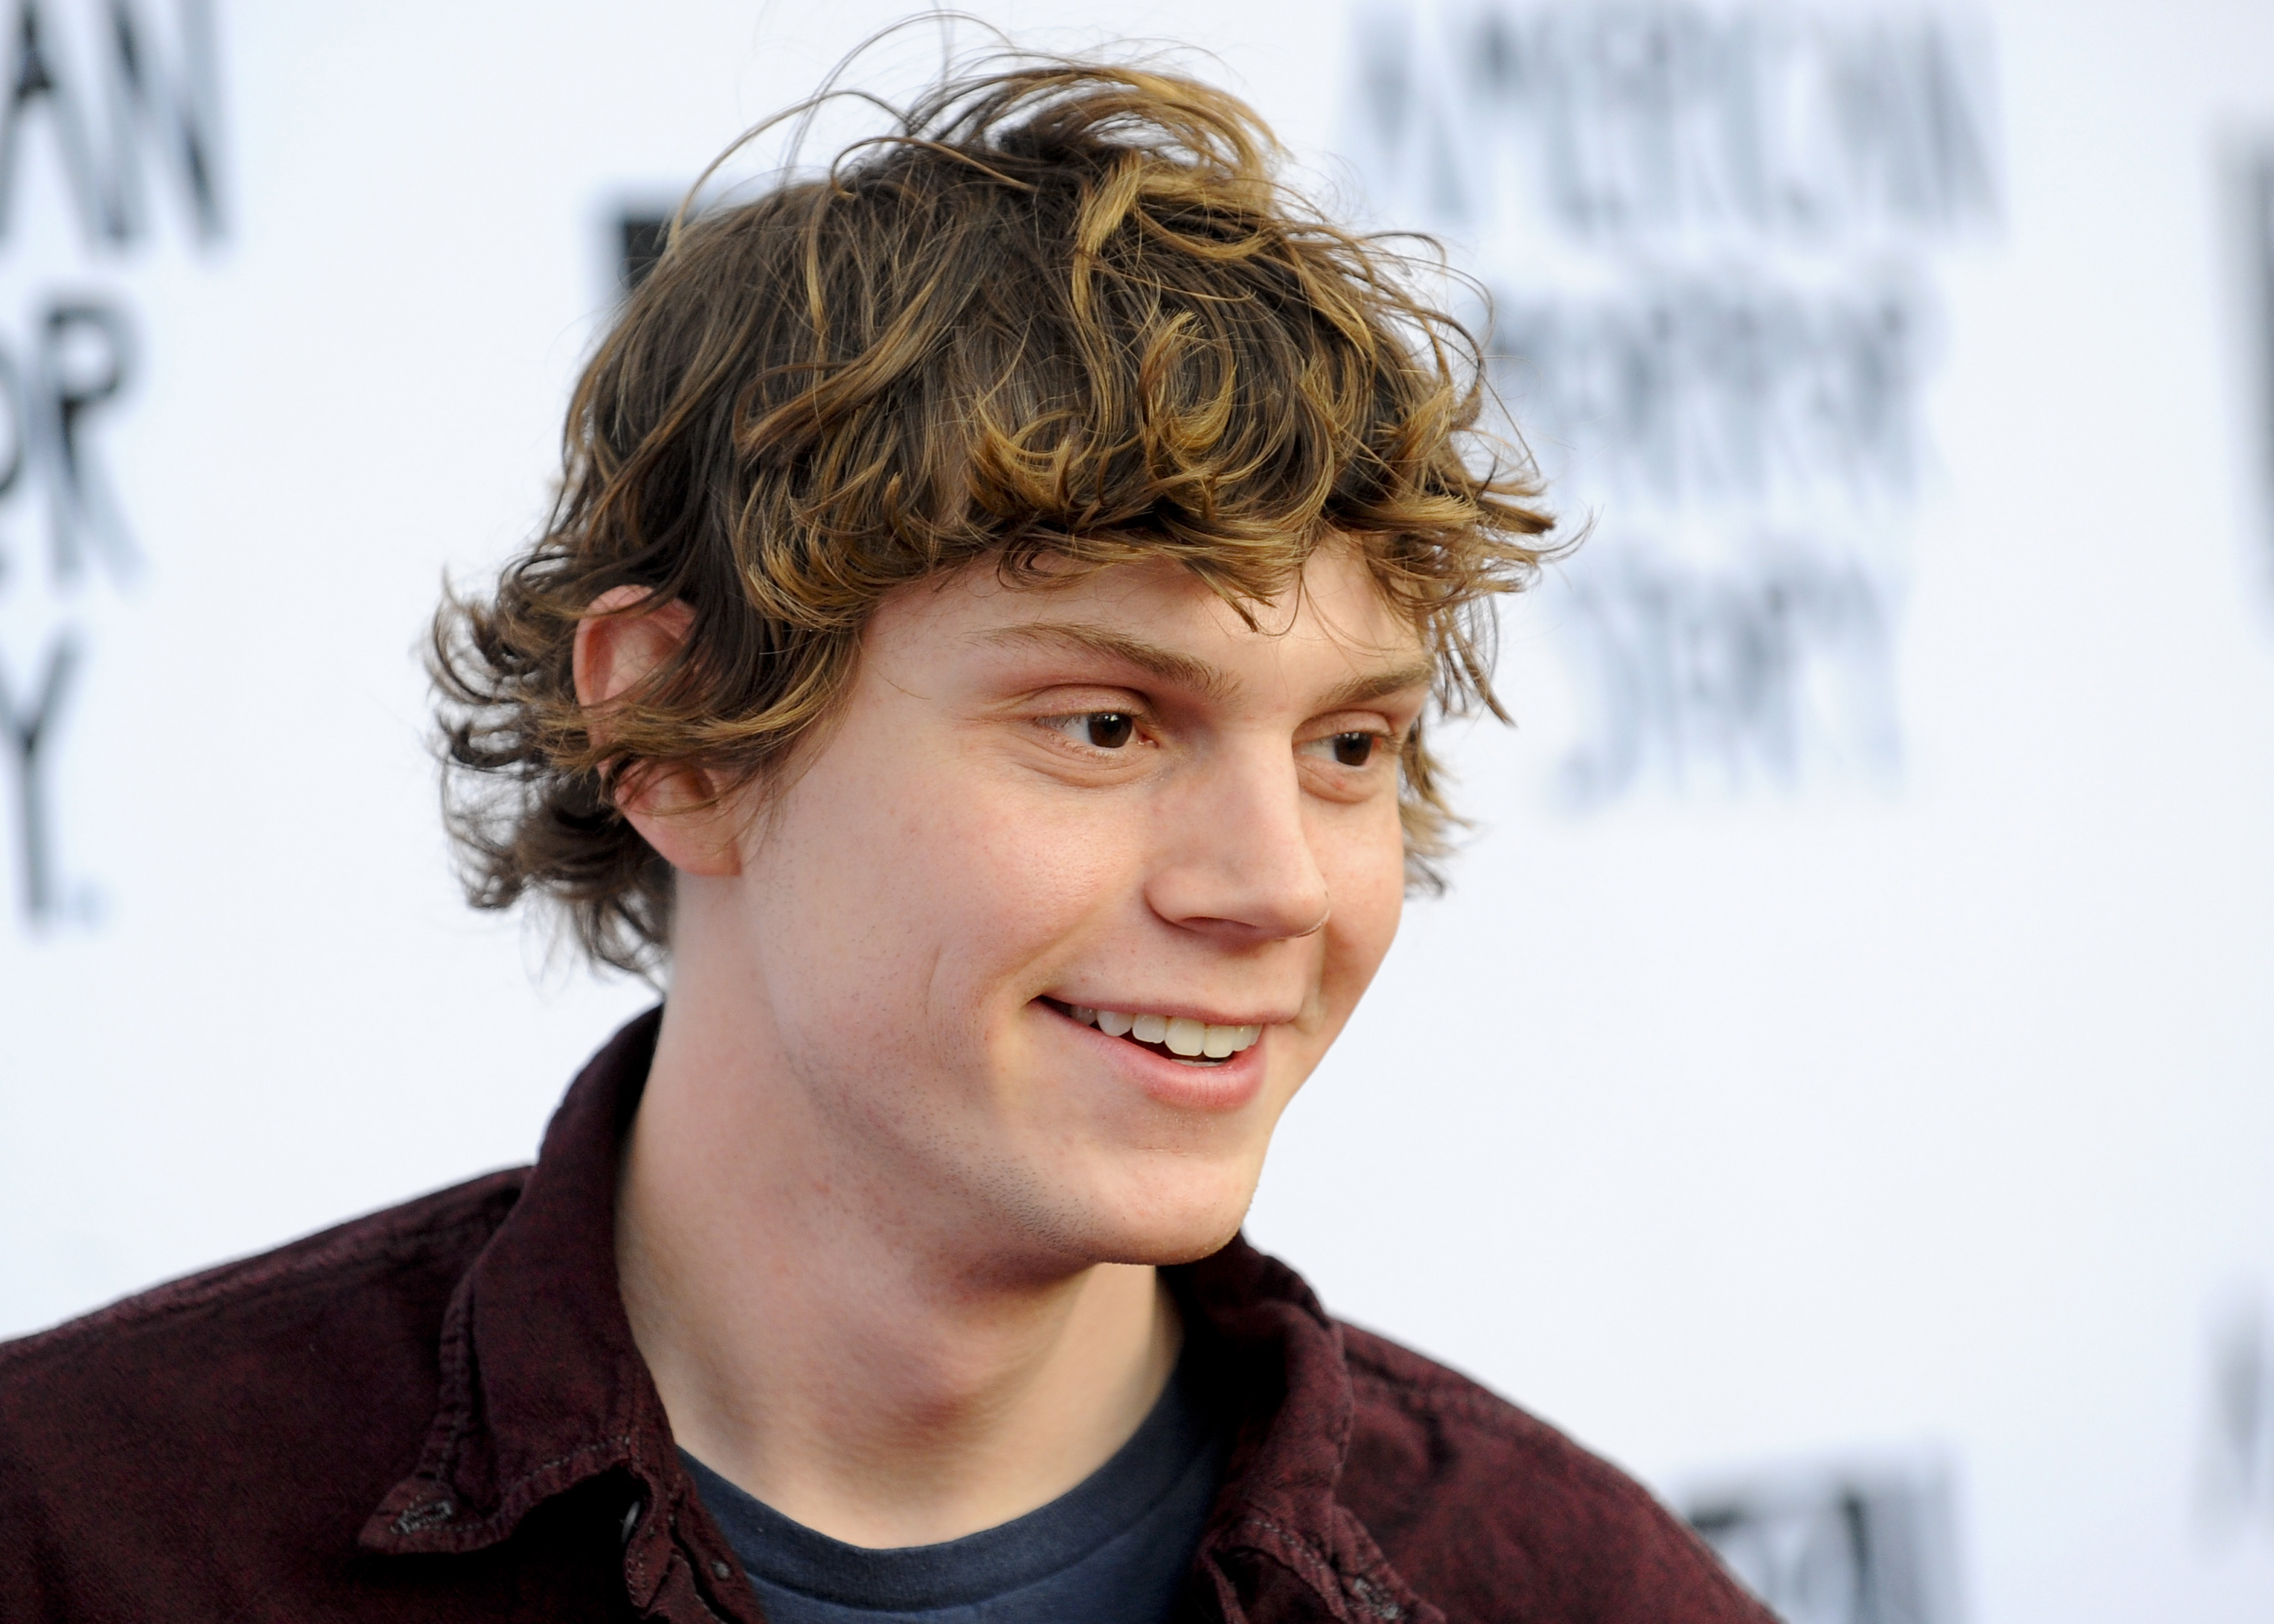 Evan Peters Wallpapers Images Photos Pictures Backgrounds